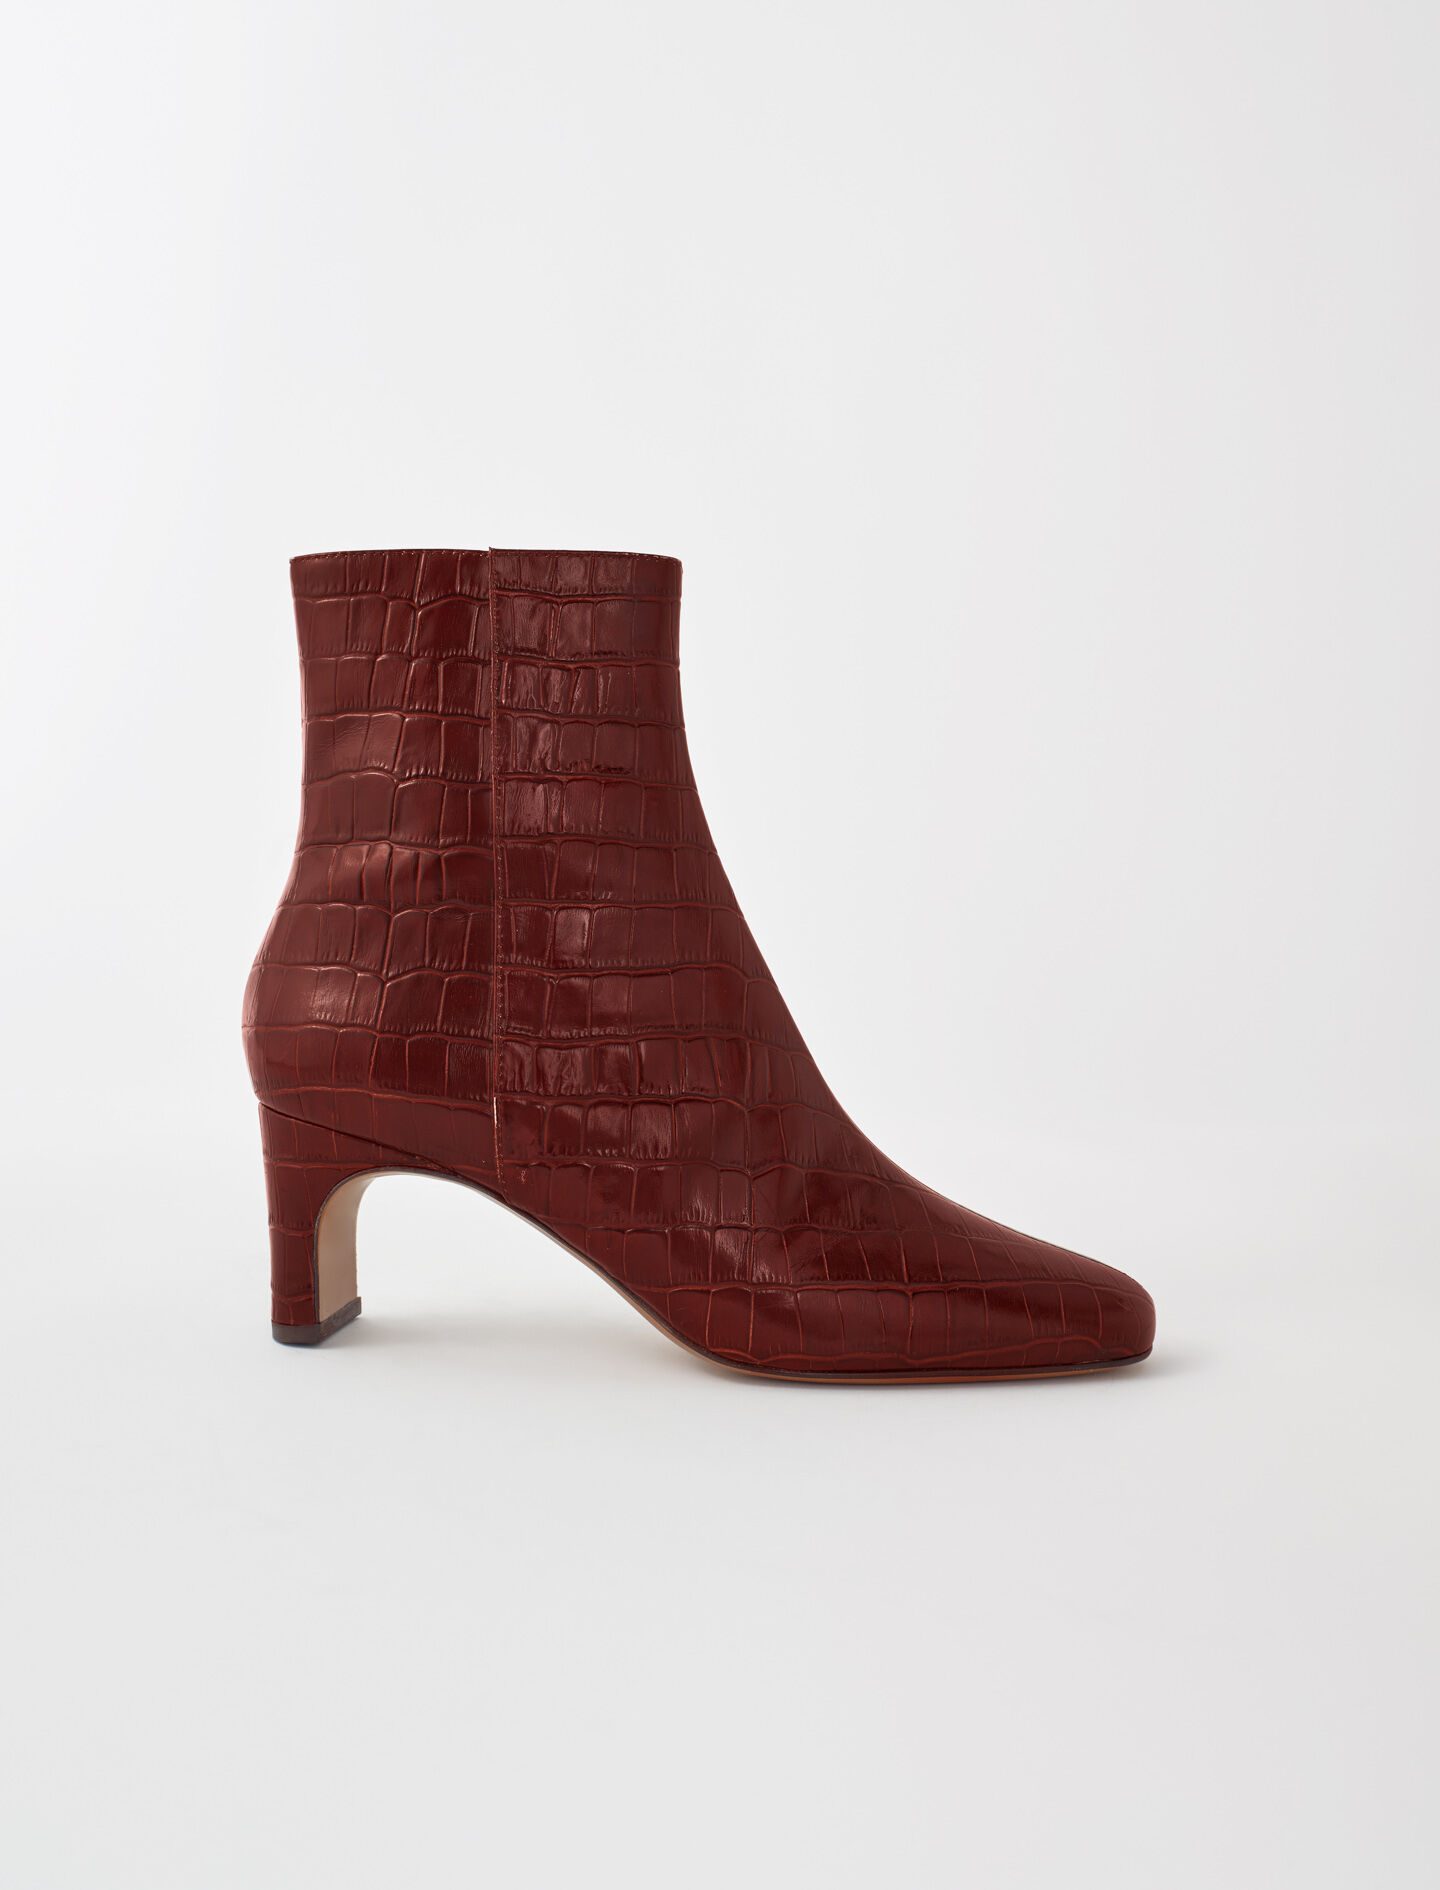 embossed leather boots